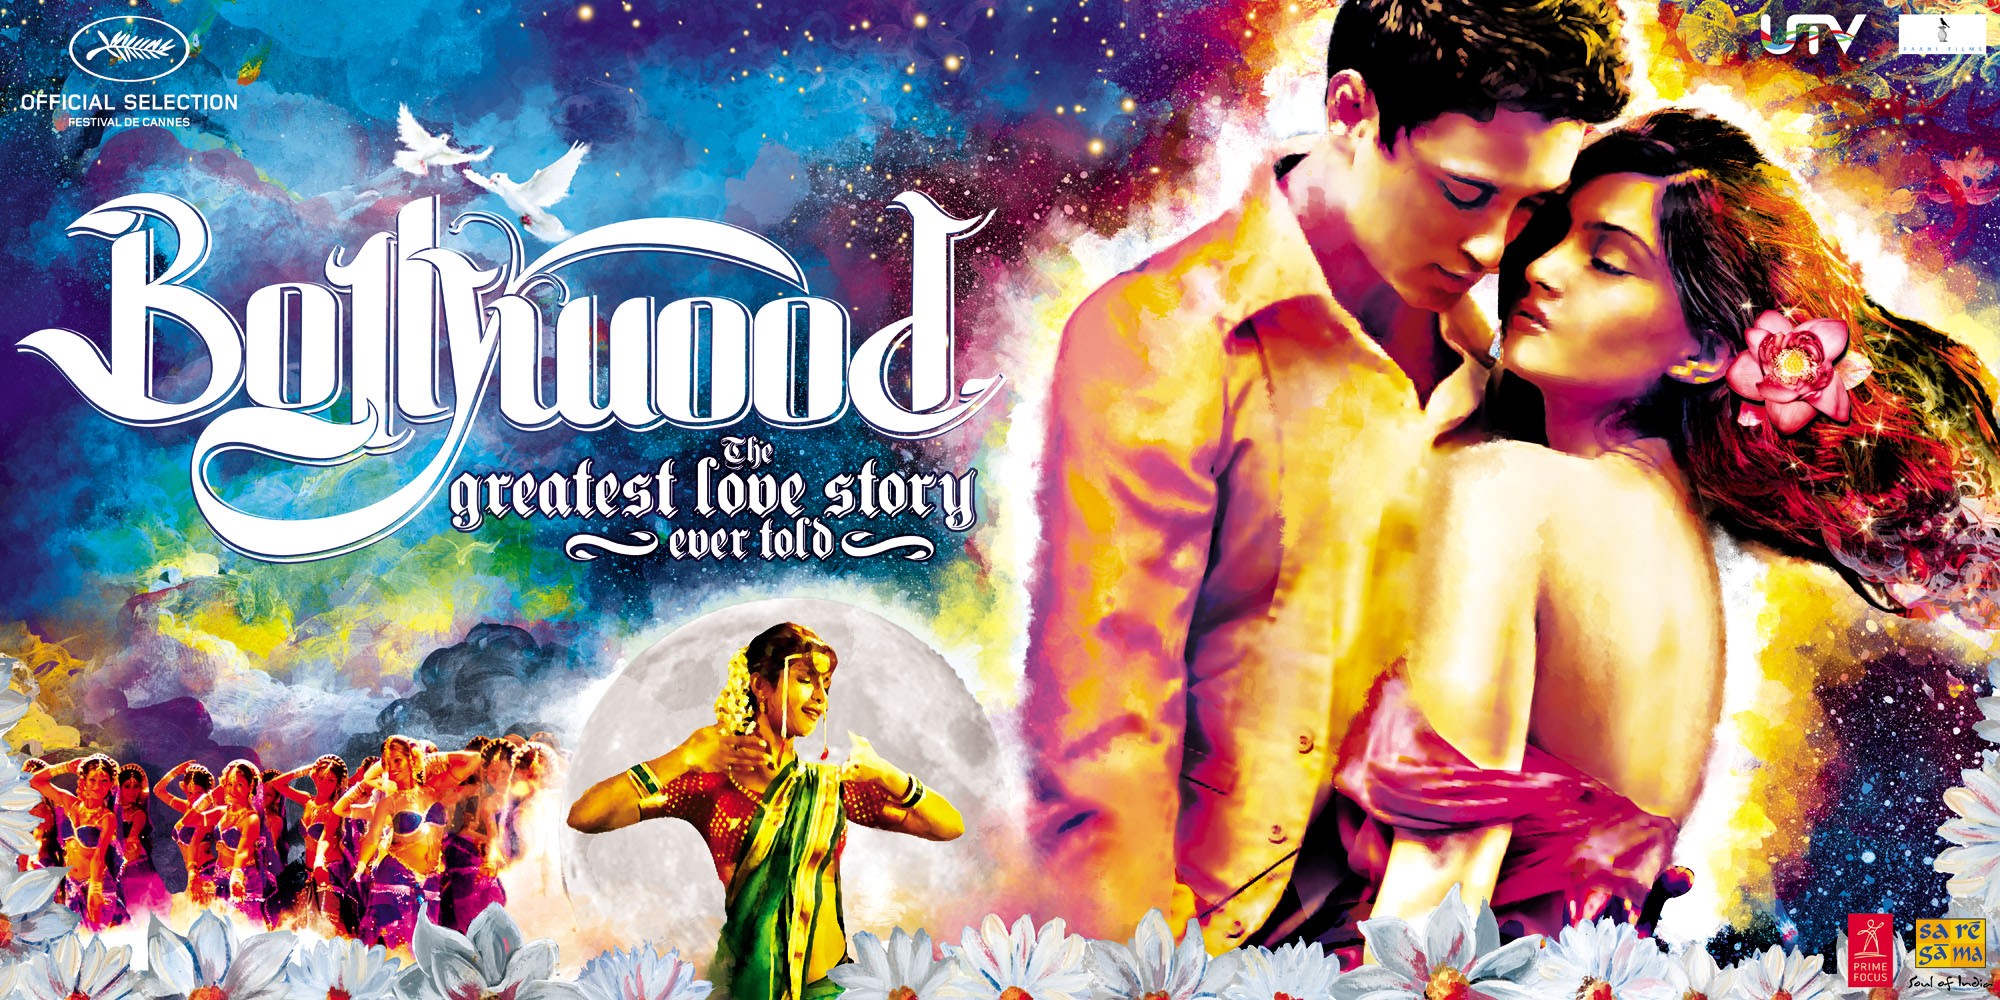 Mega Sized Movie Poster Image for Bollywood: The Greatest Love Story Ever Told 